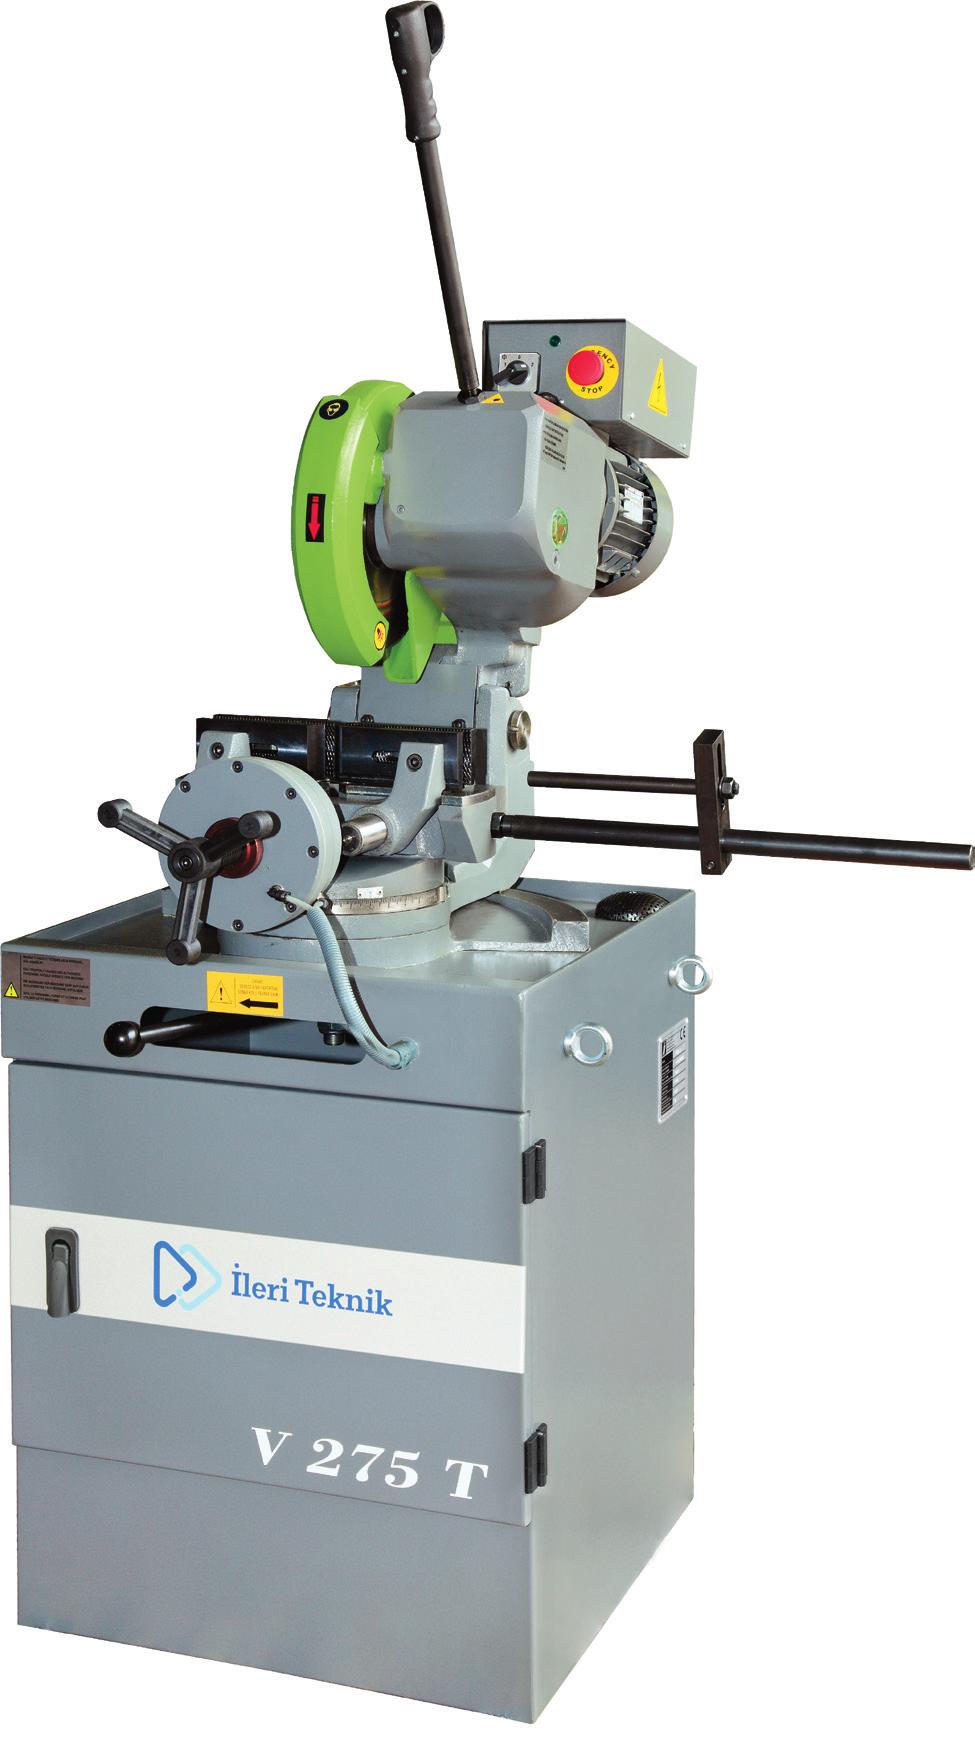 V T operated by a hand Airoperated clamp for material vise Large base for ultrastability.